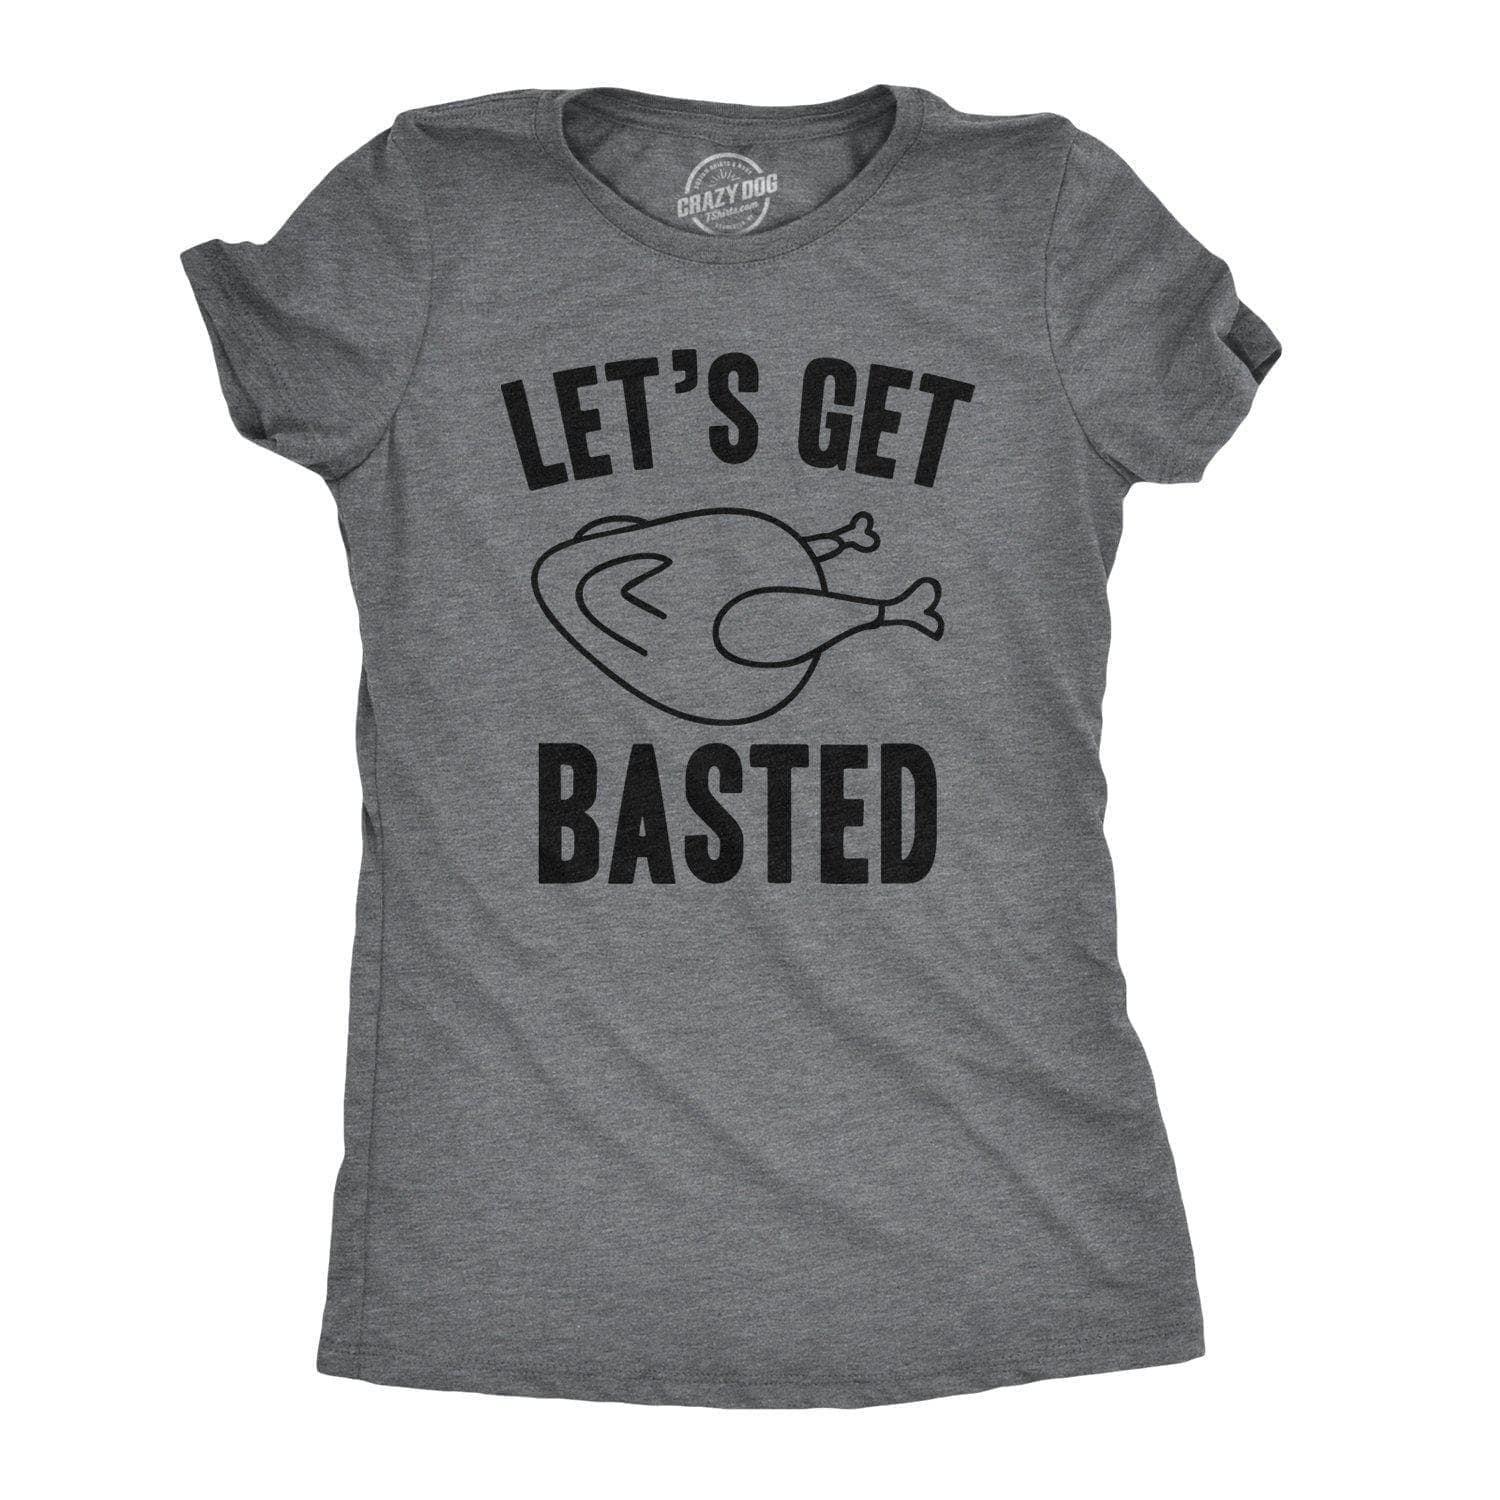 Let's Get Basted Women's Tshirt - Crazy Dog T-Shirts